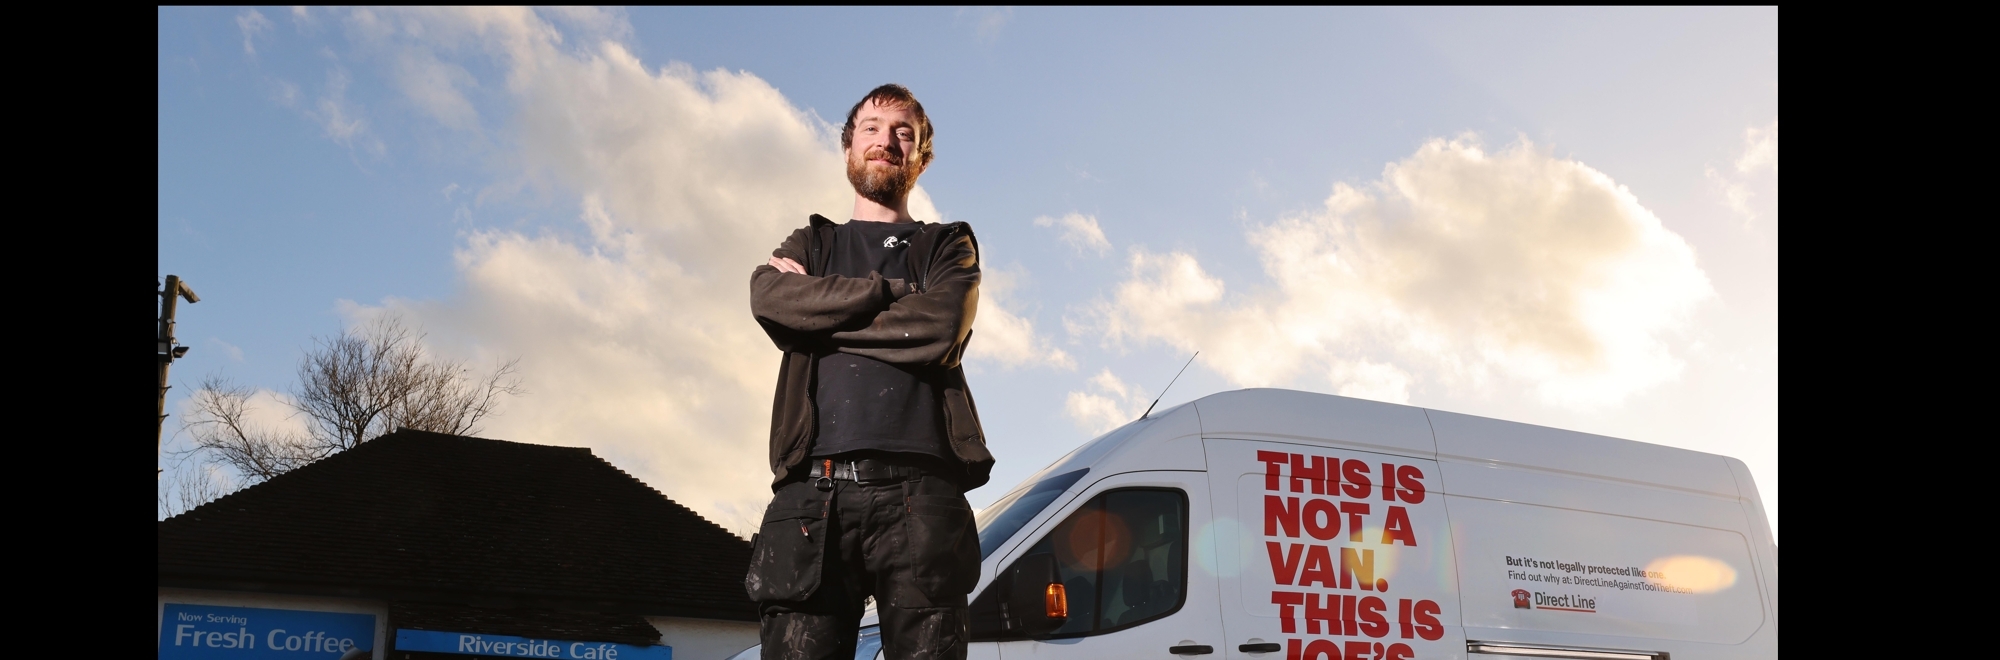 This is not a van: Direct Line turns a van into an office to spotlight tool theft